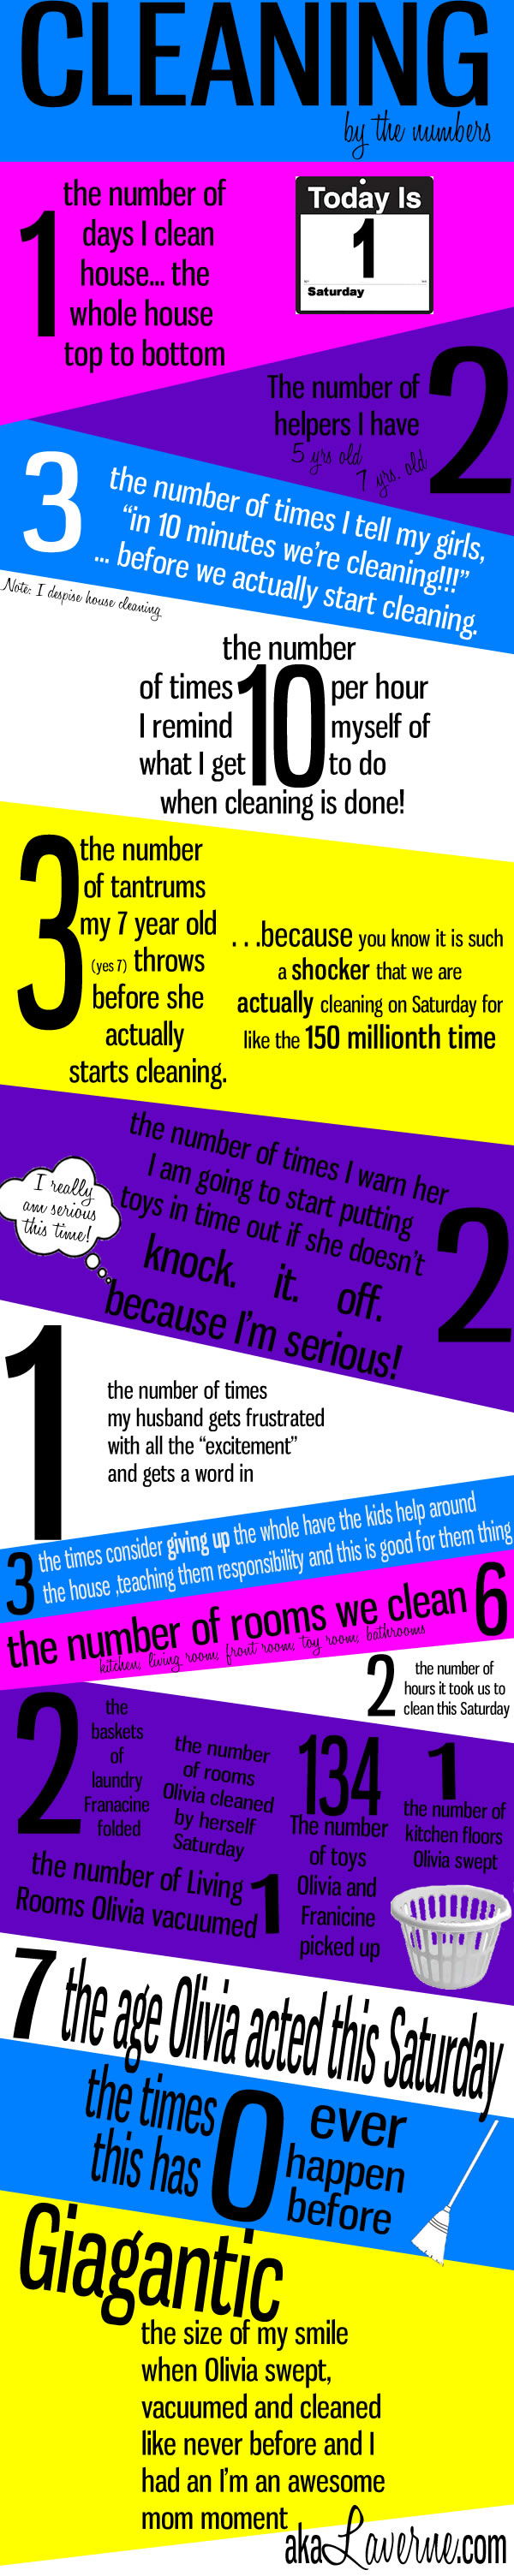 Infograph: Cleaning by the Numbers